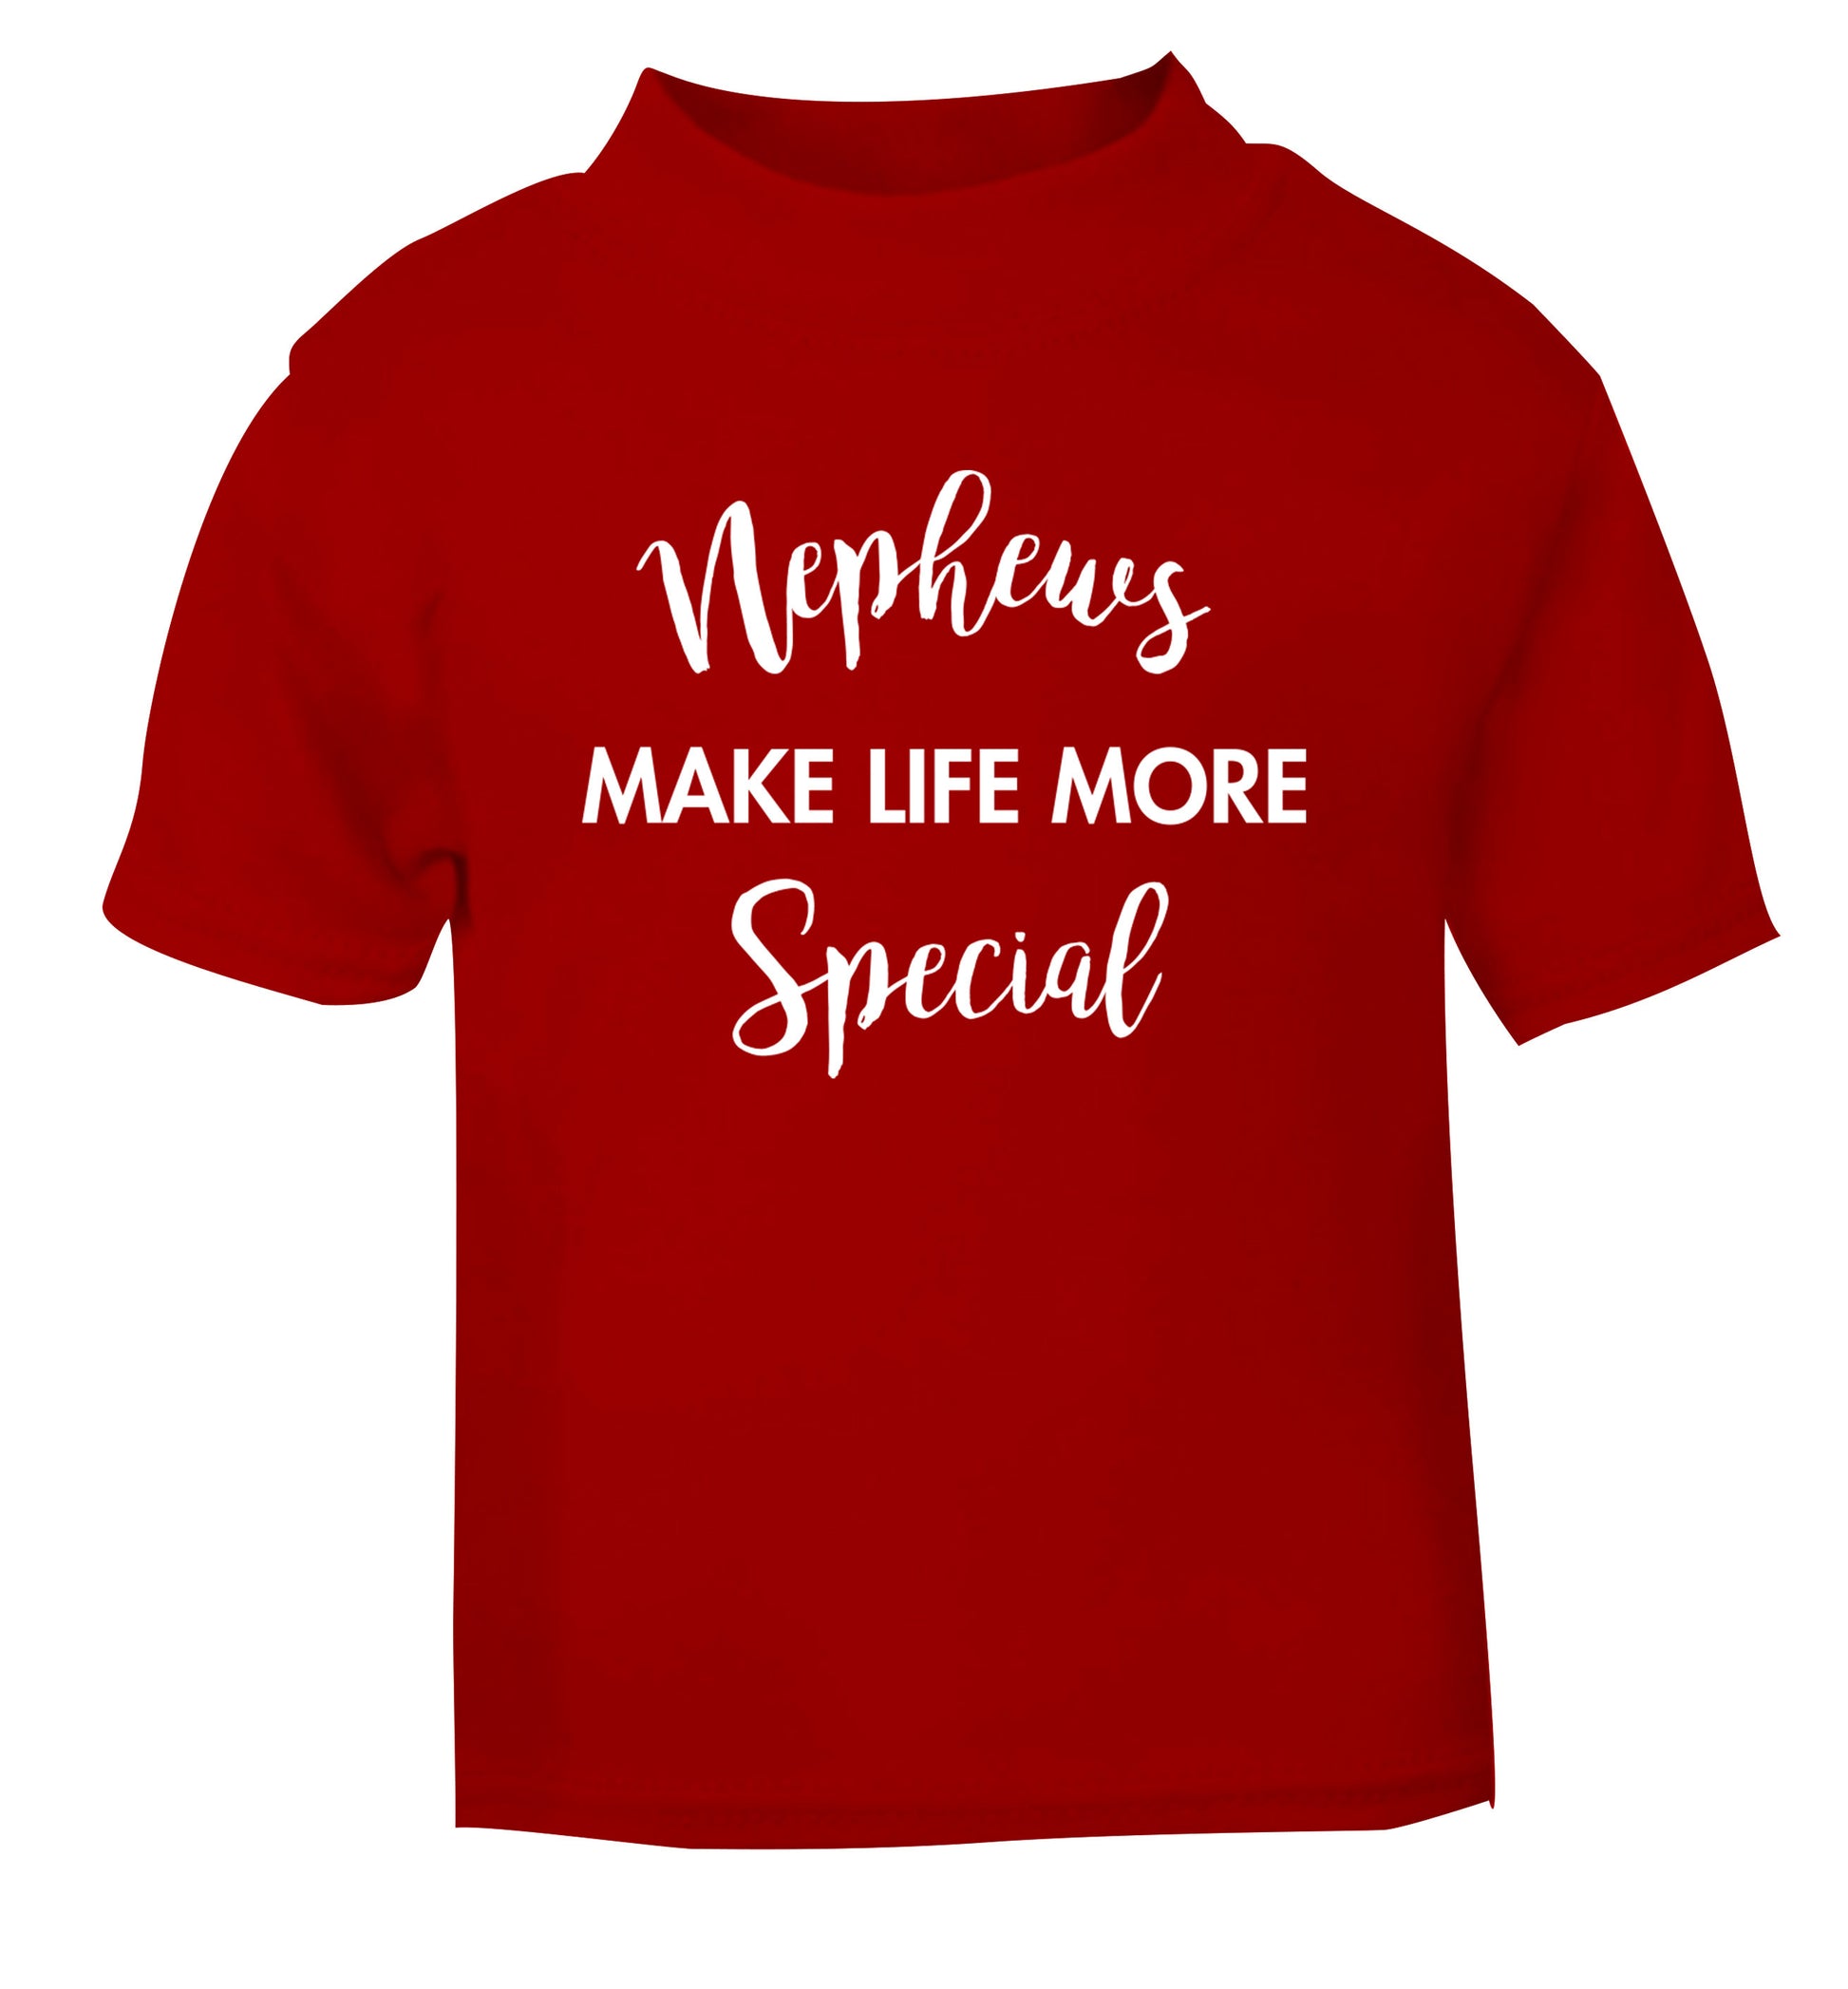 Nephews make life more special red Baby Toddler Tshirt 2 Years